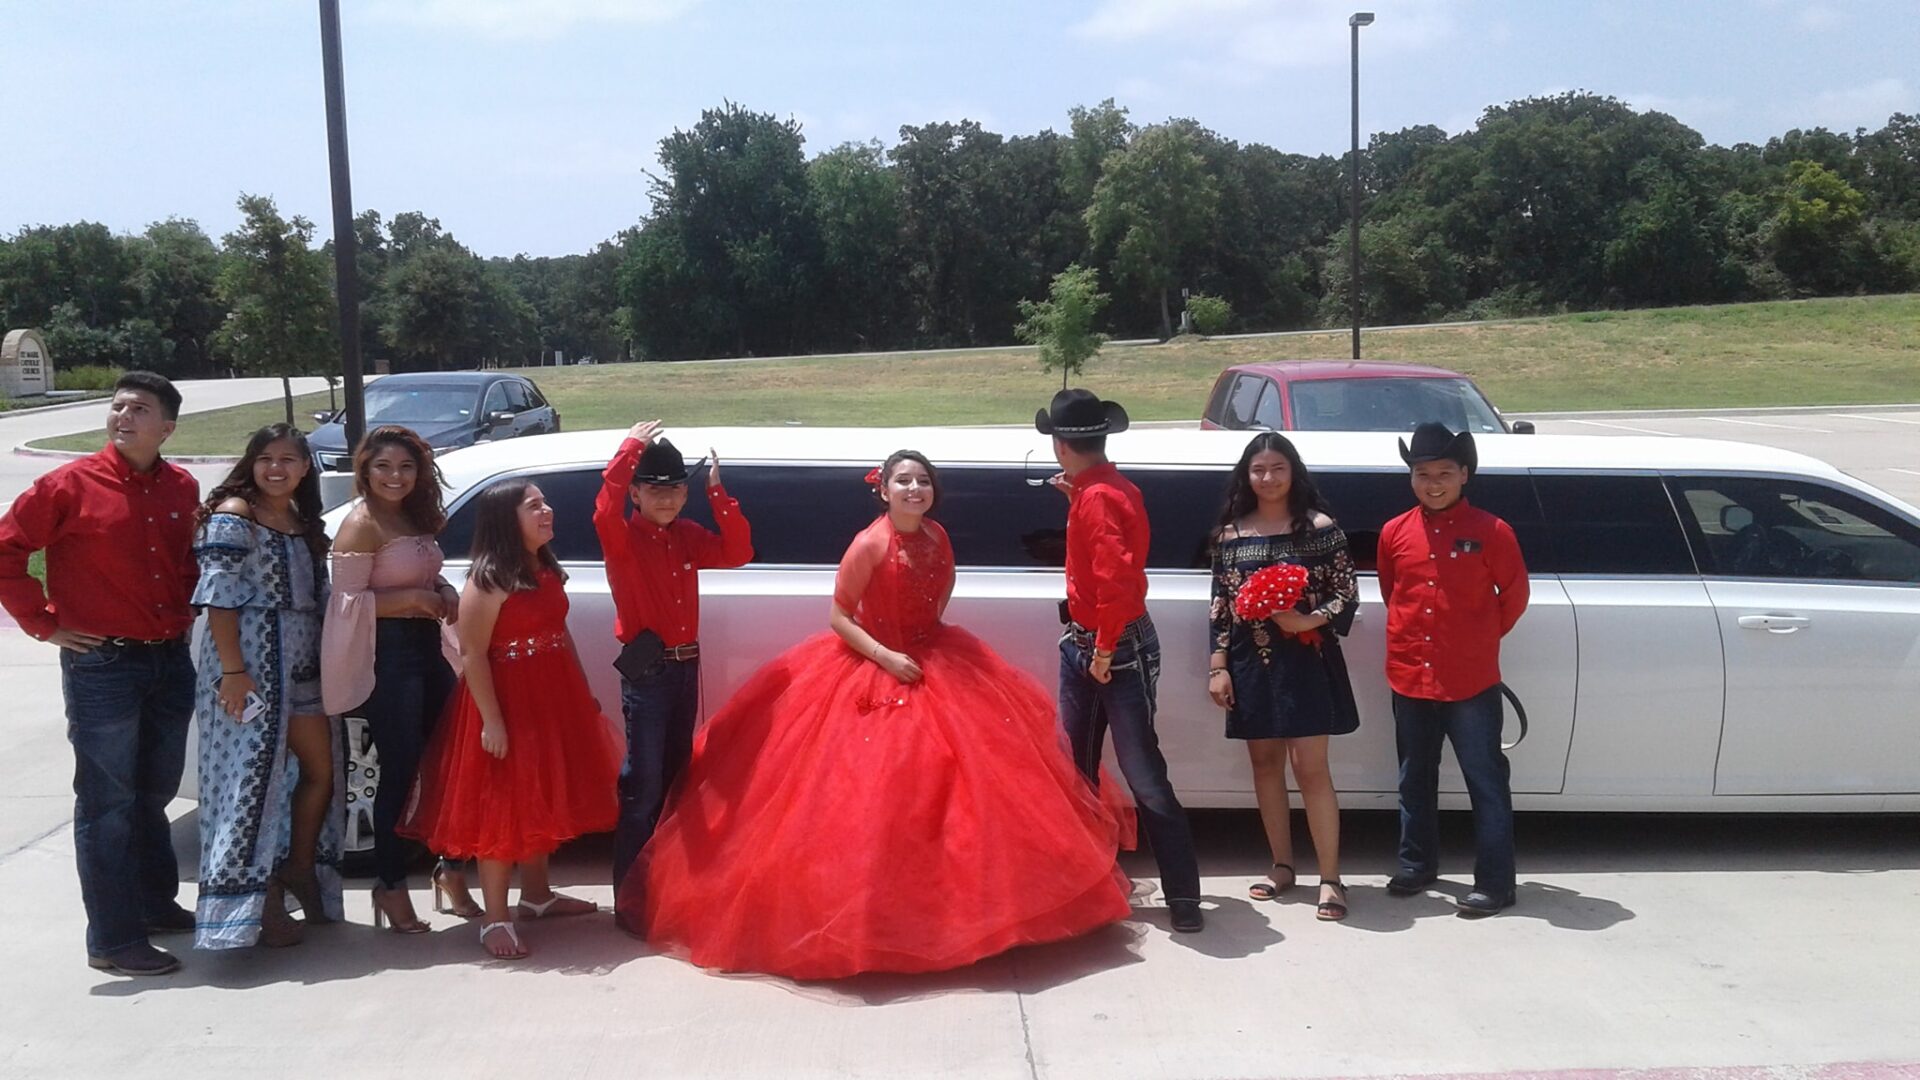 Group of people in red by a white limo.